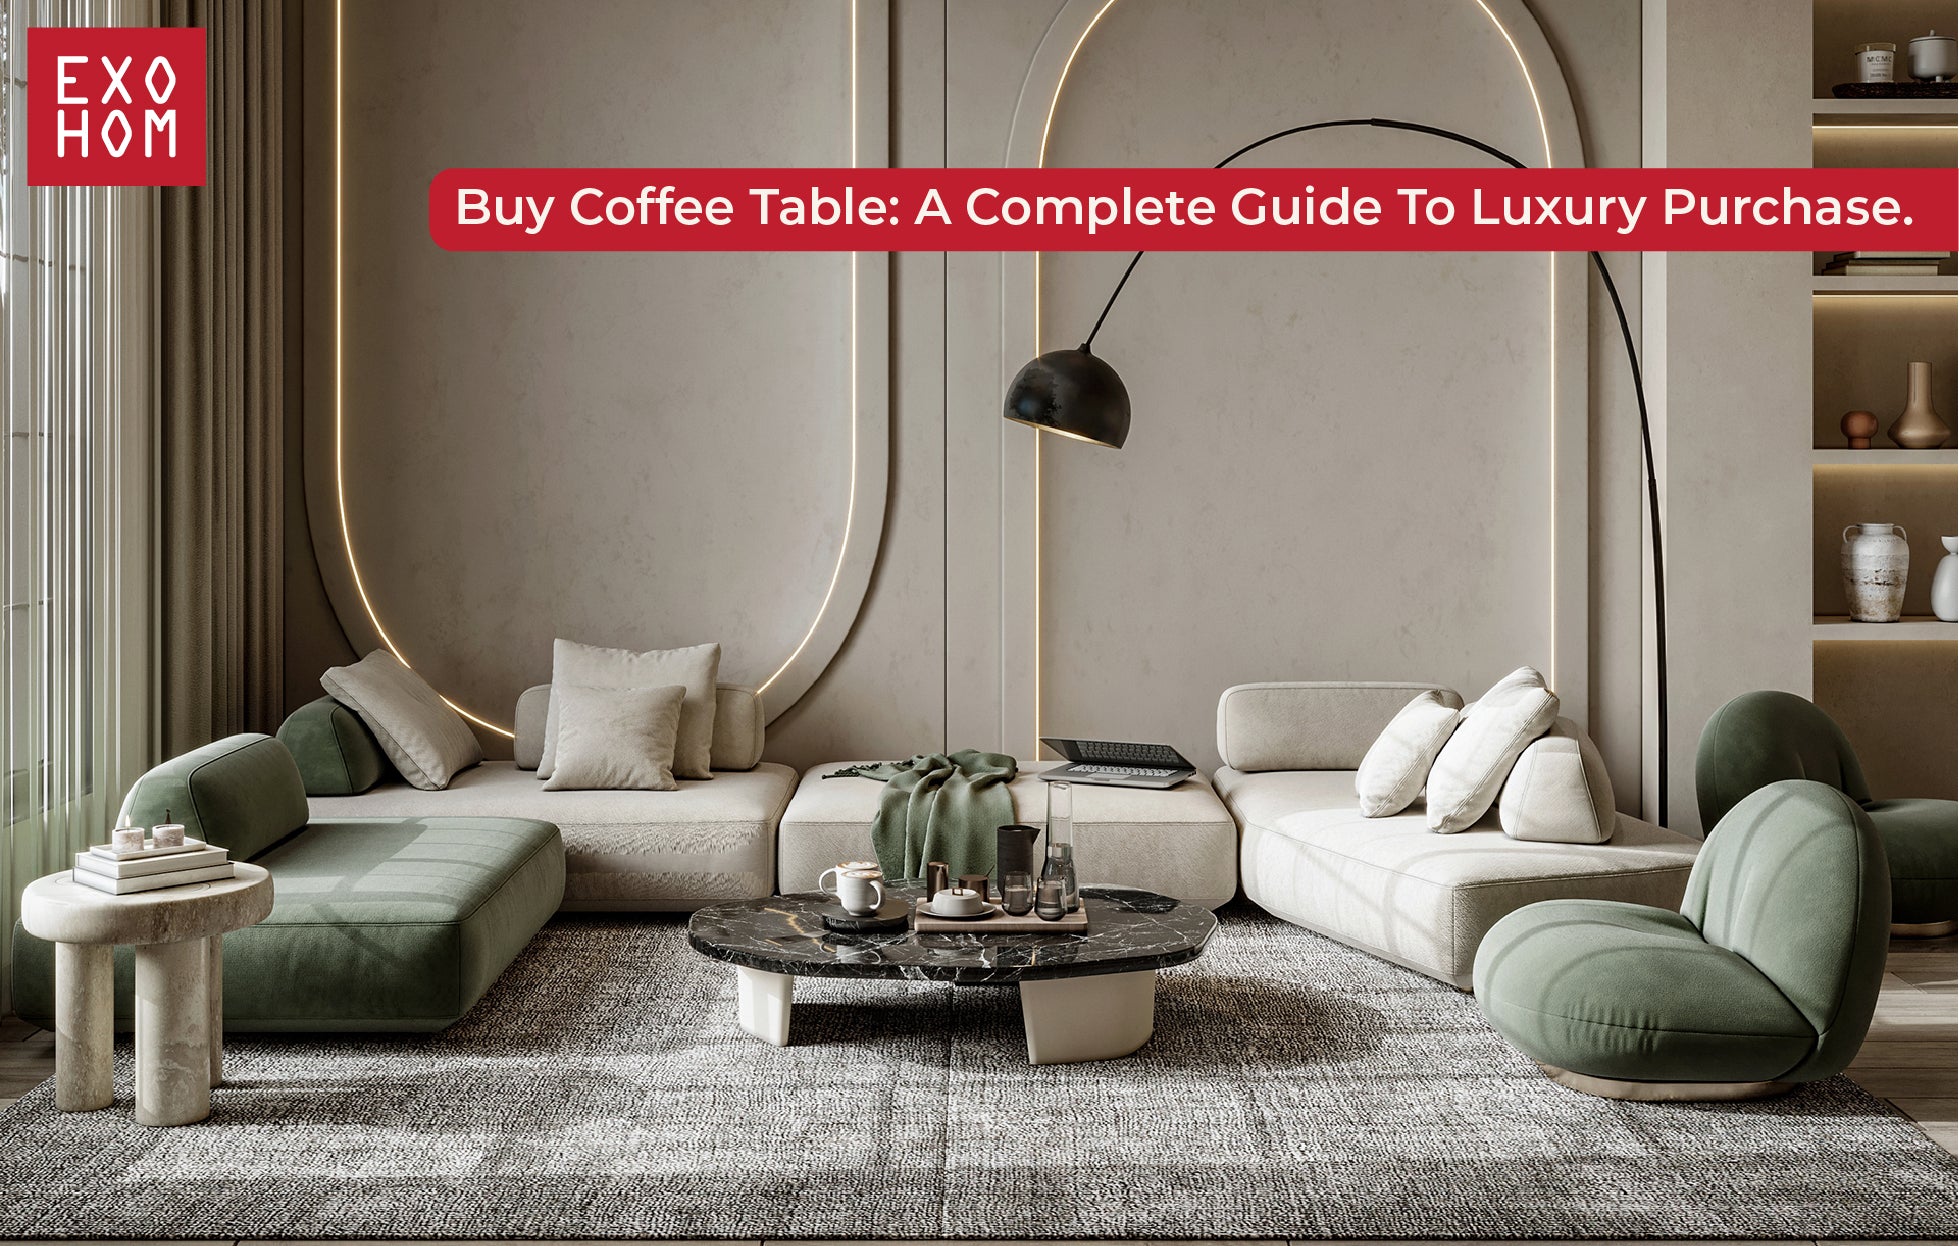 Buy Coffee Table: A Complete Guide to a Luxury Purchase